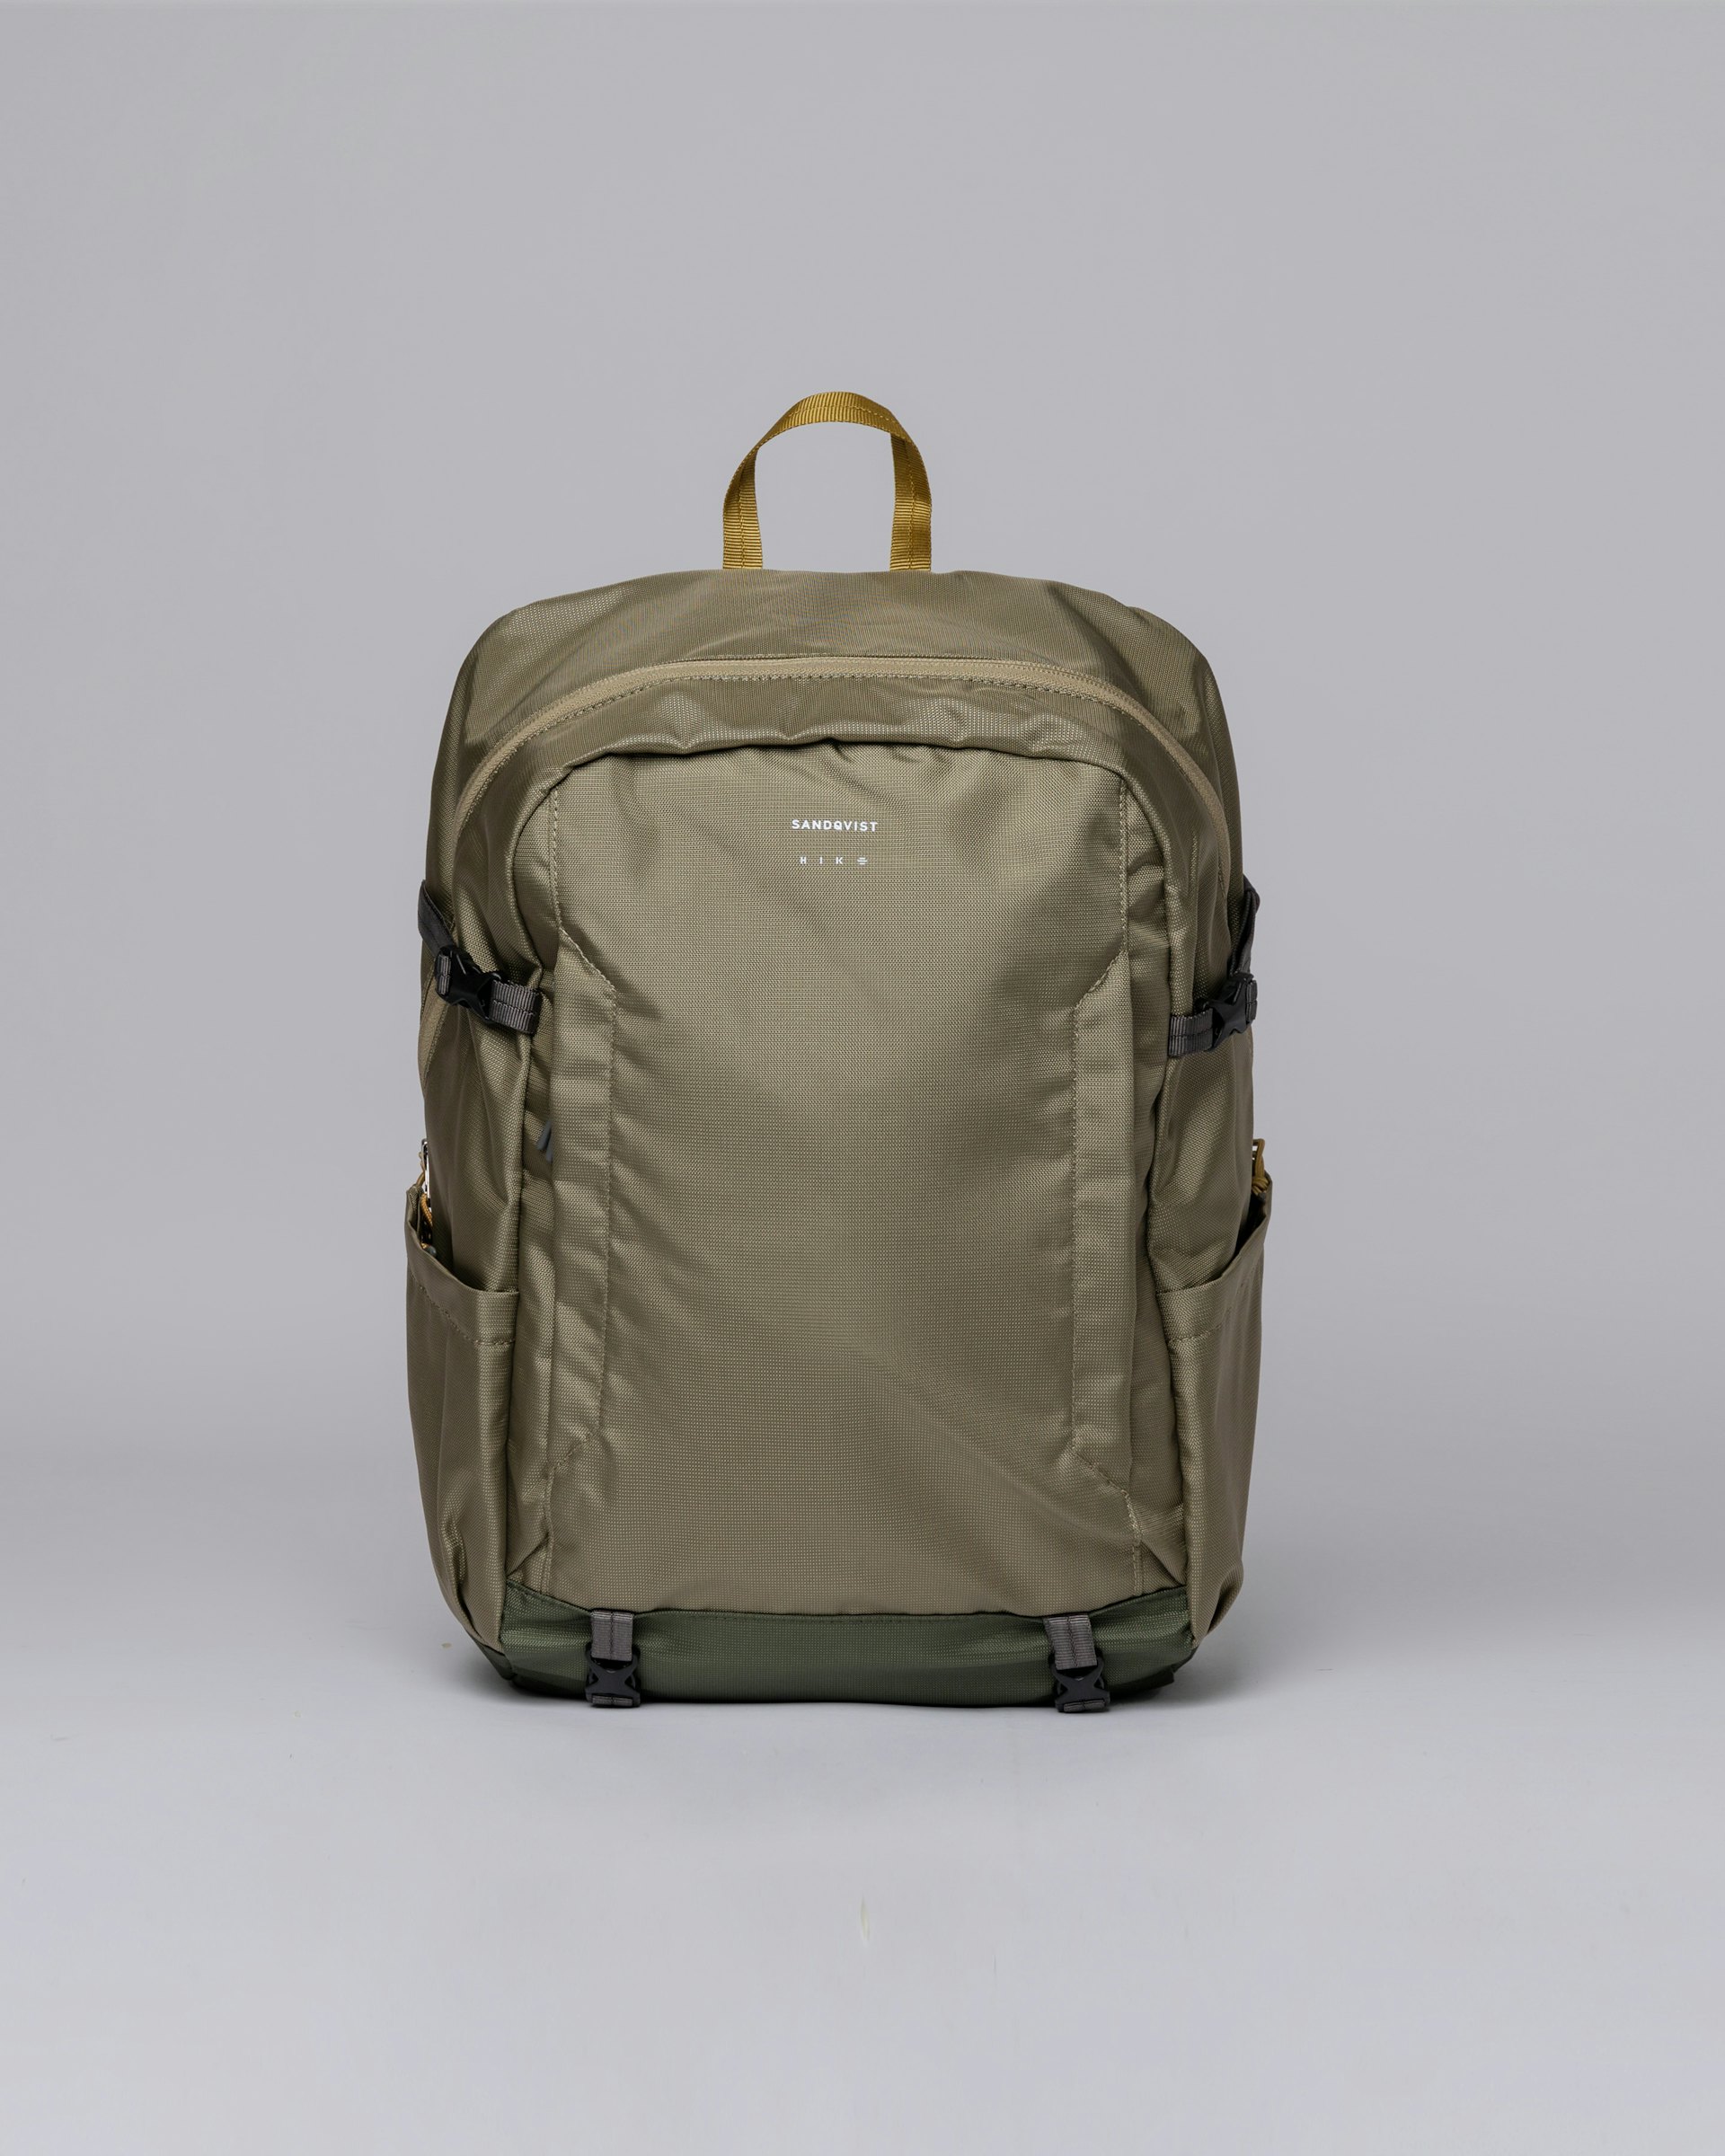 Ridge Hike belongs to the category Backpacks and is in color green (1 of 5)